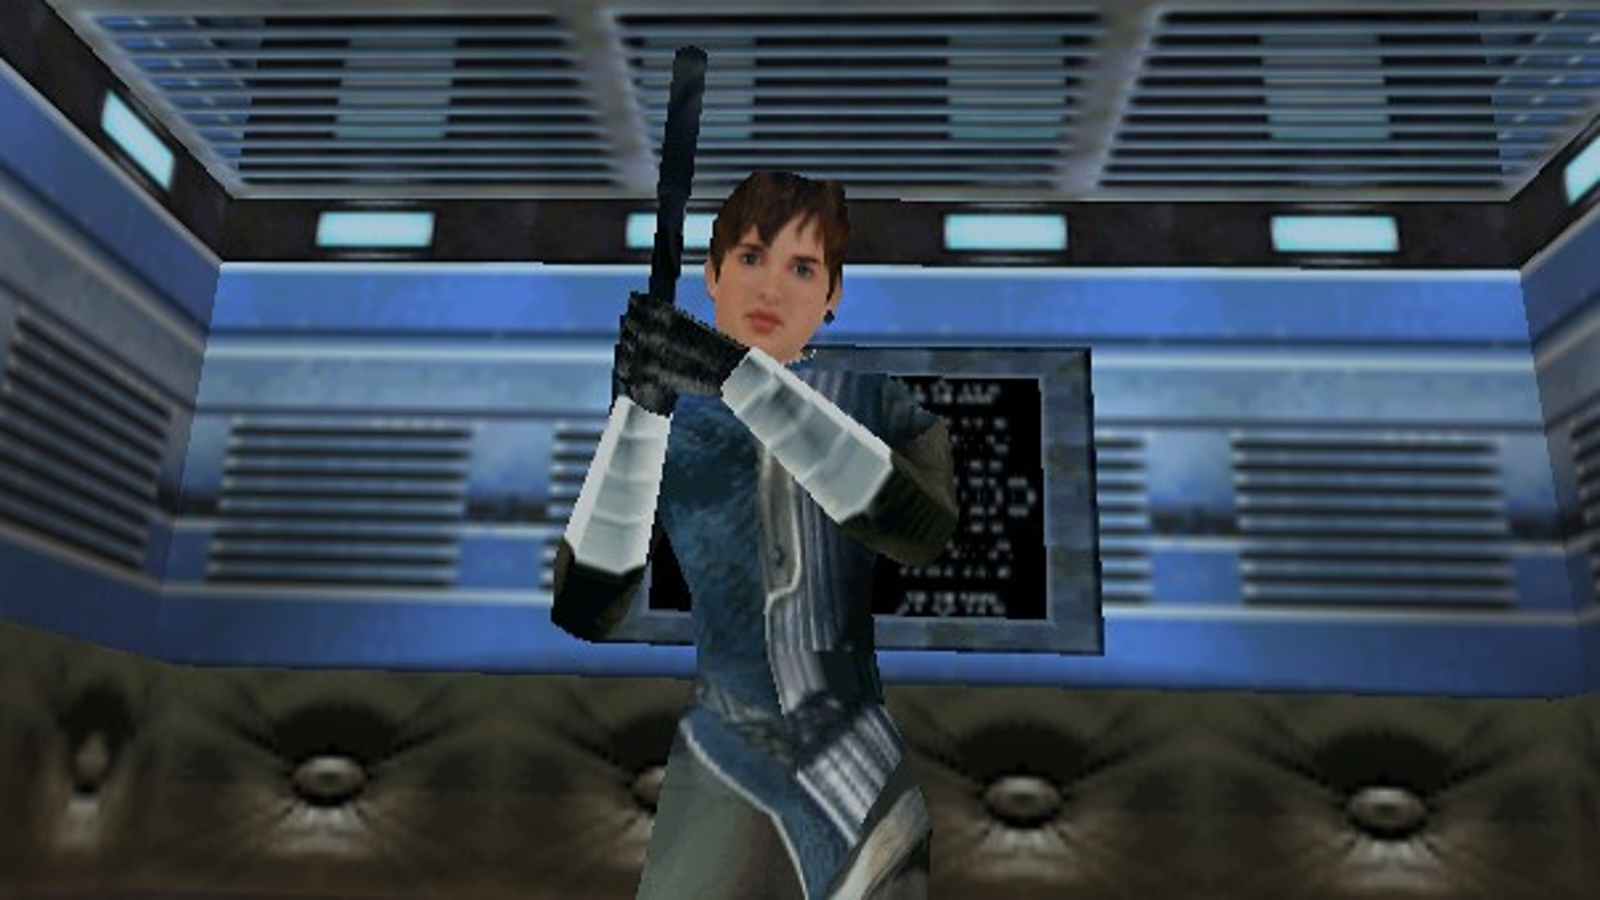 Classic FPS Perfect Dark Gets Unofficial PC Port 20 Years Later